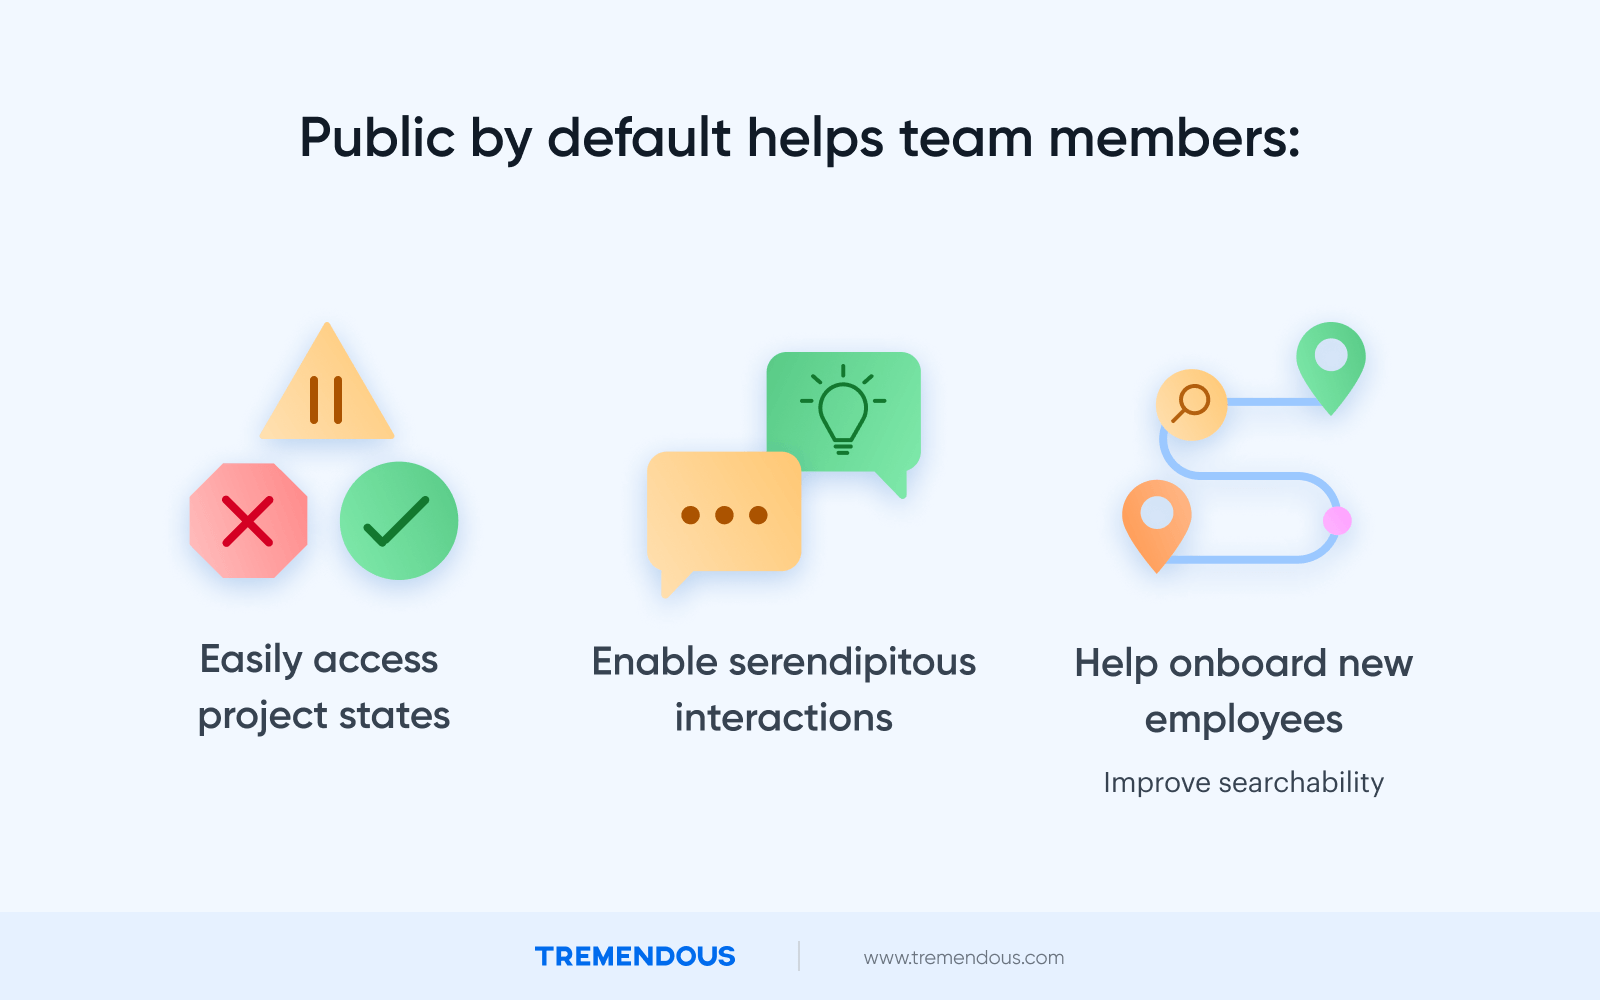 Text reads: "Public by default helps team members: Easily access project states, enable serendipitous interactions, and help onboard new employees."